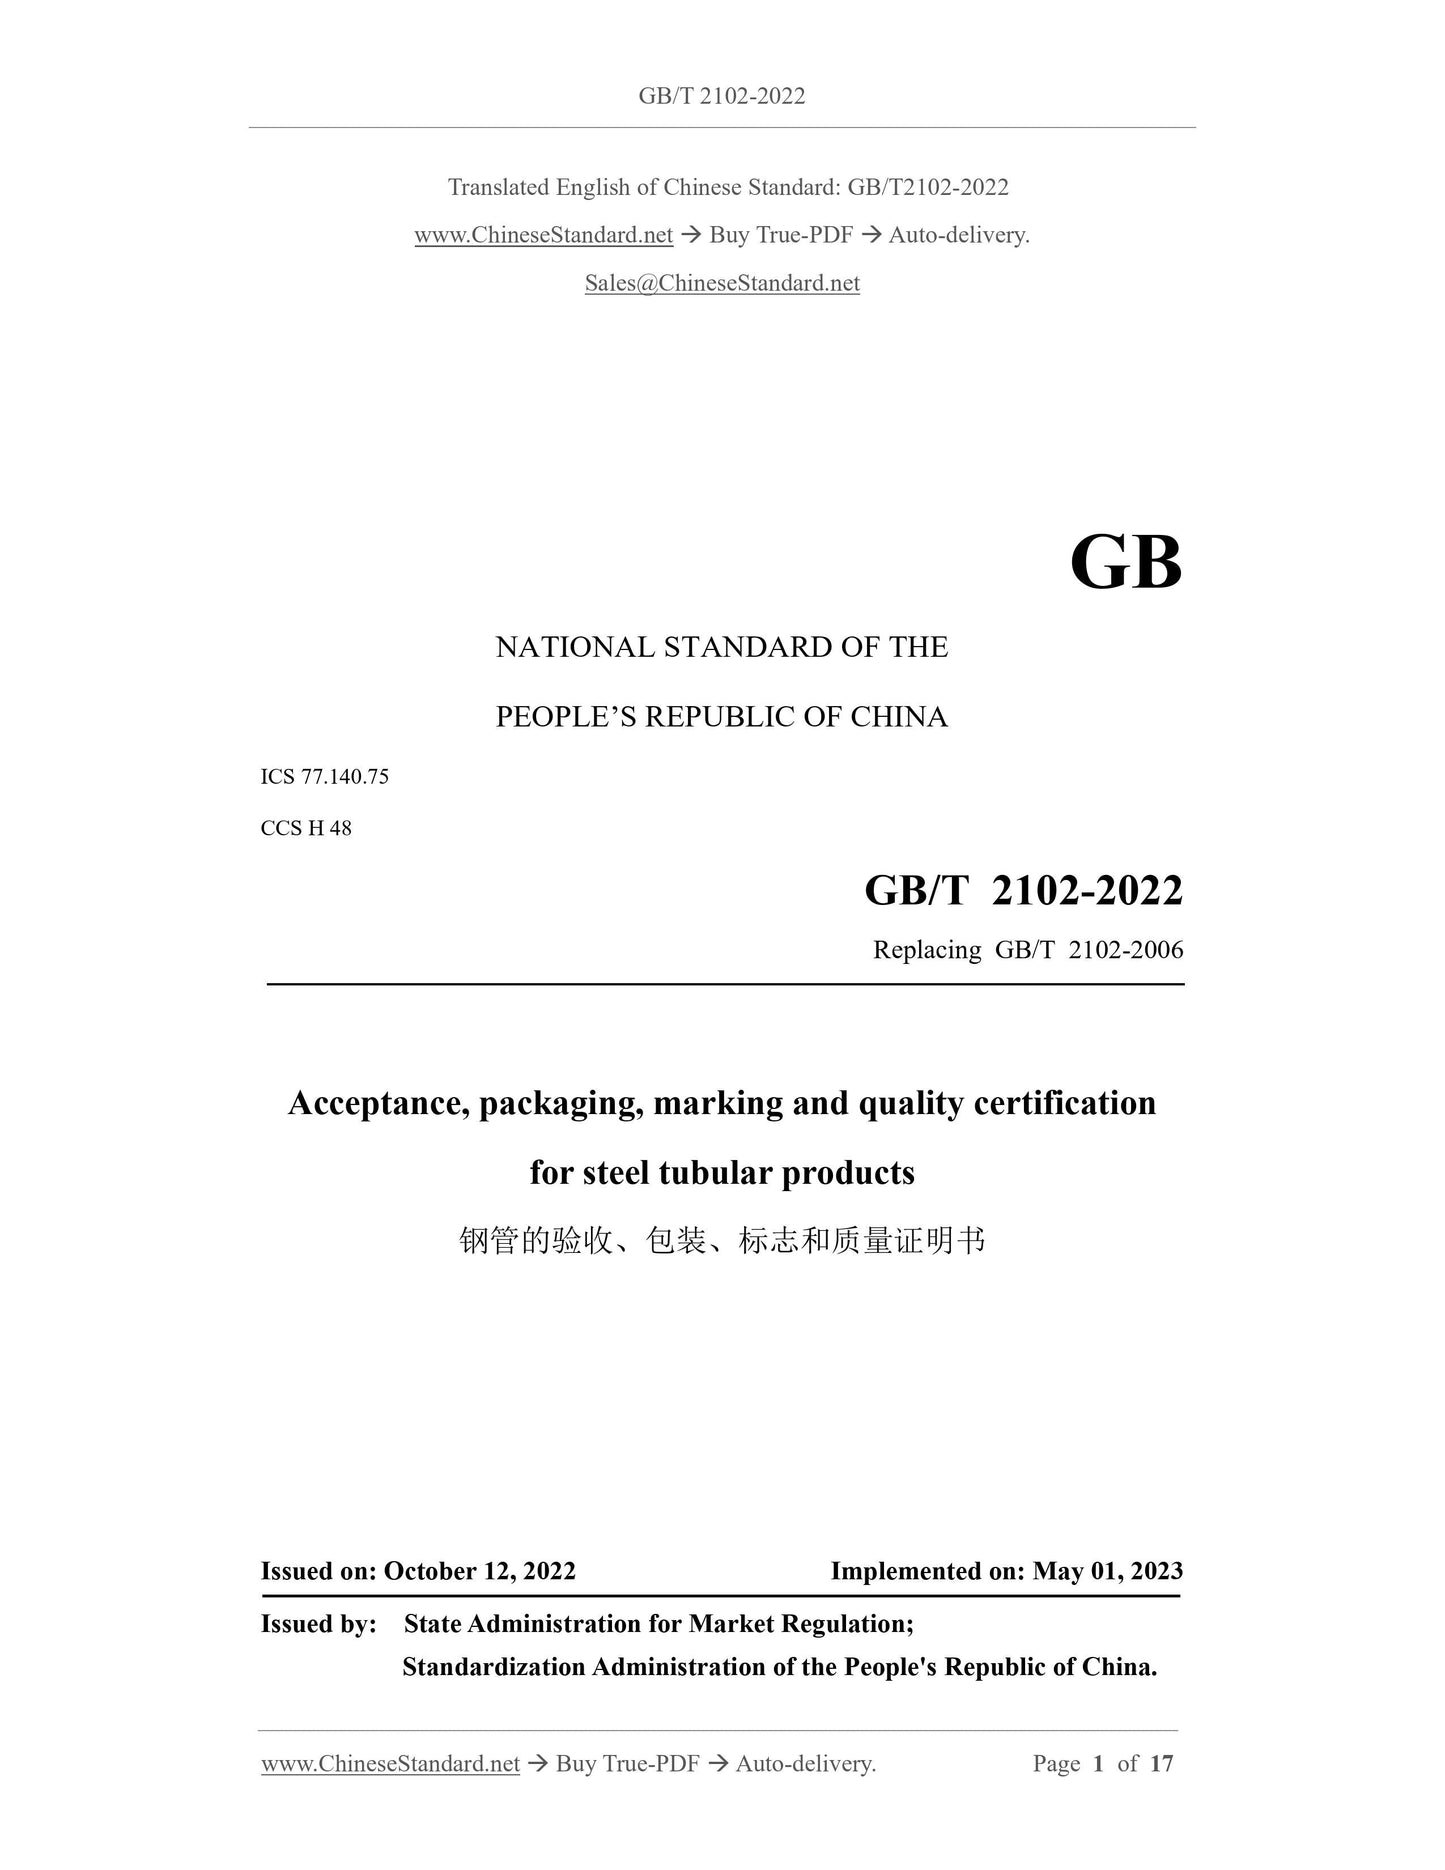 GB/T 2102-2022 Page 1